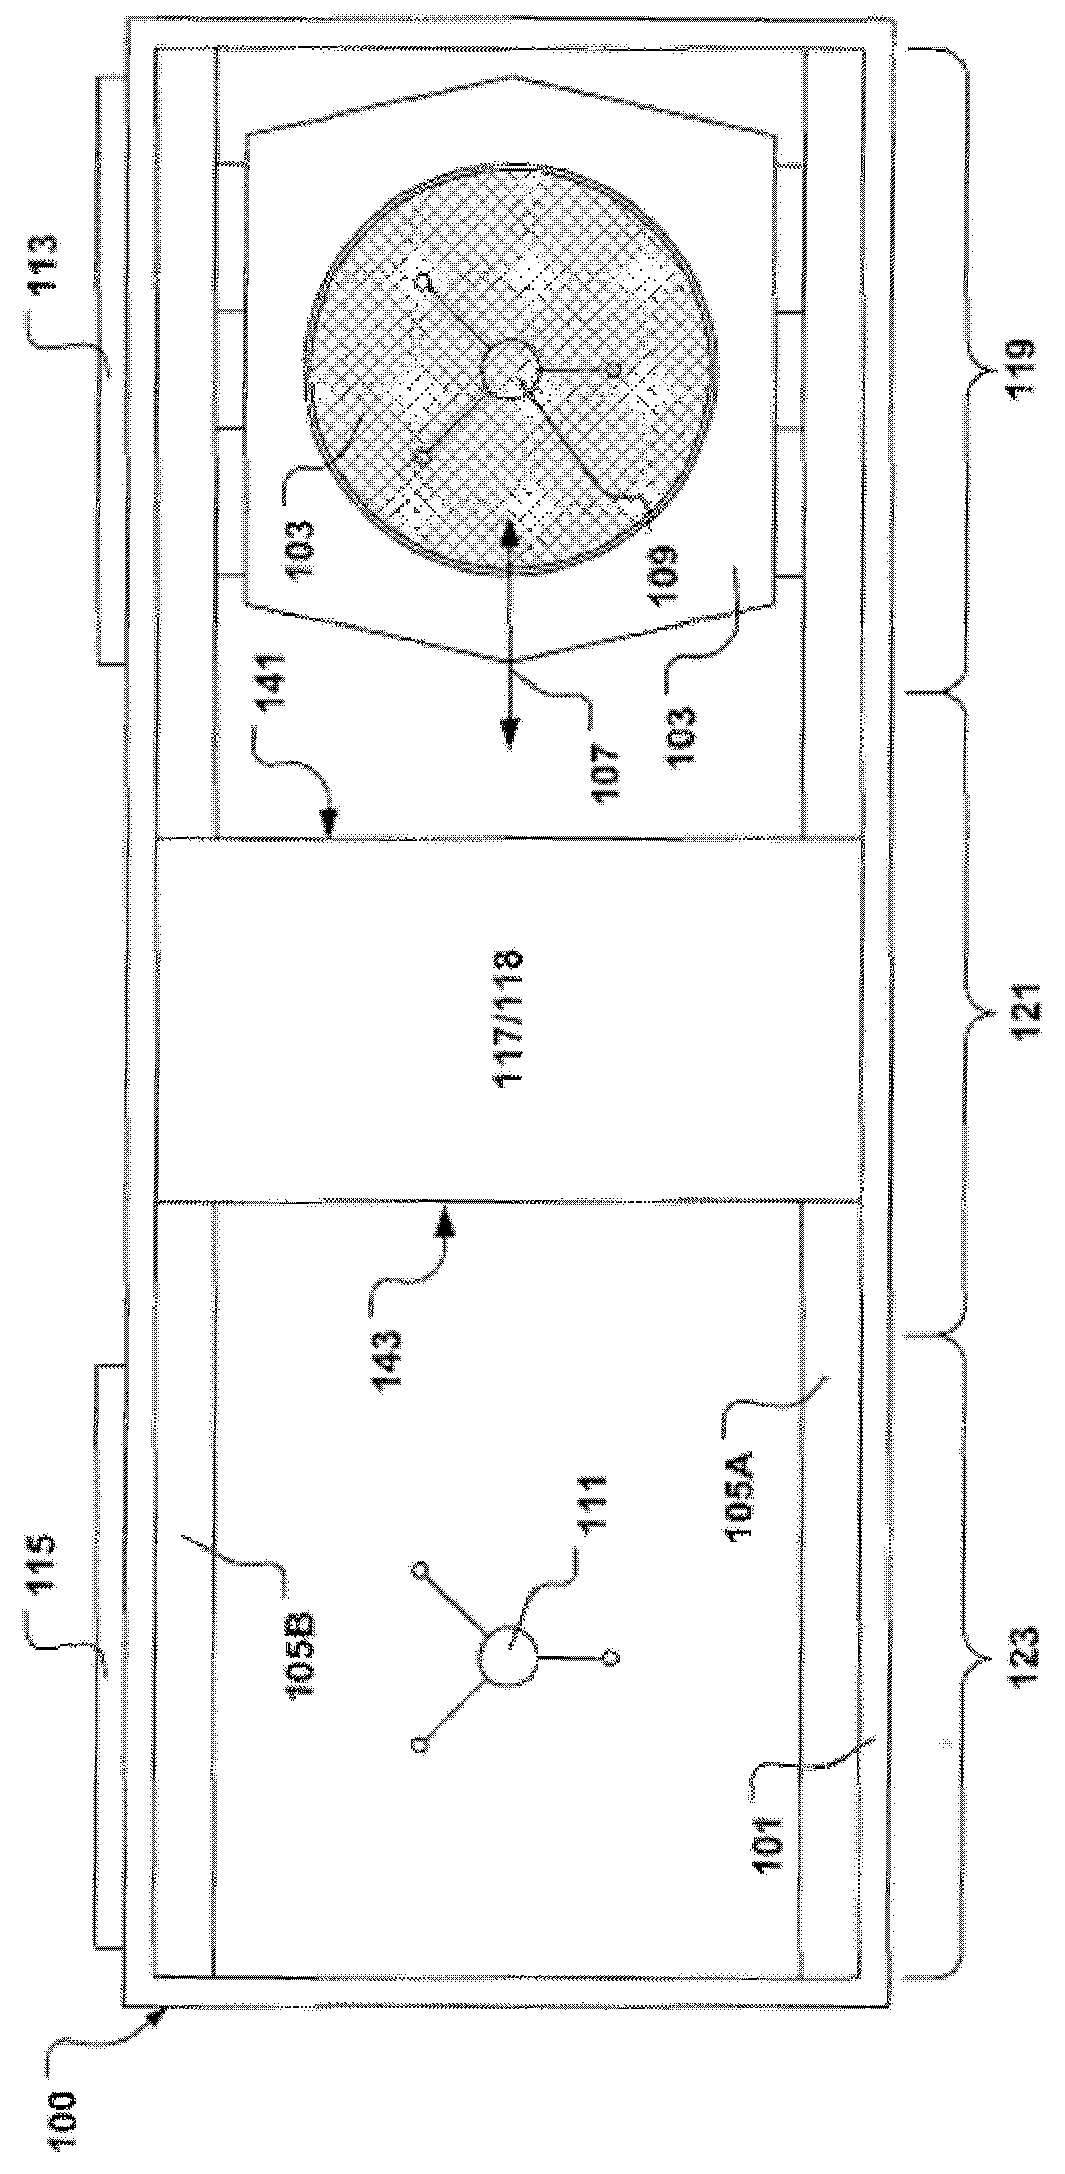 Apparatus and system for cleaning substrate